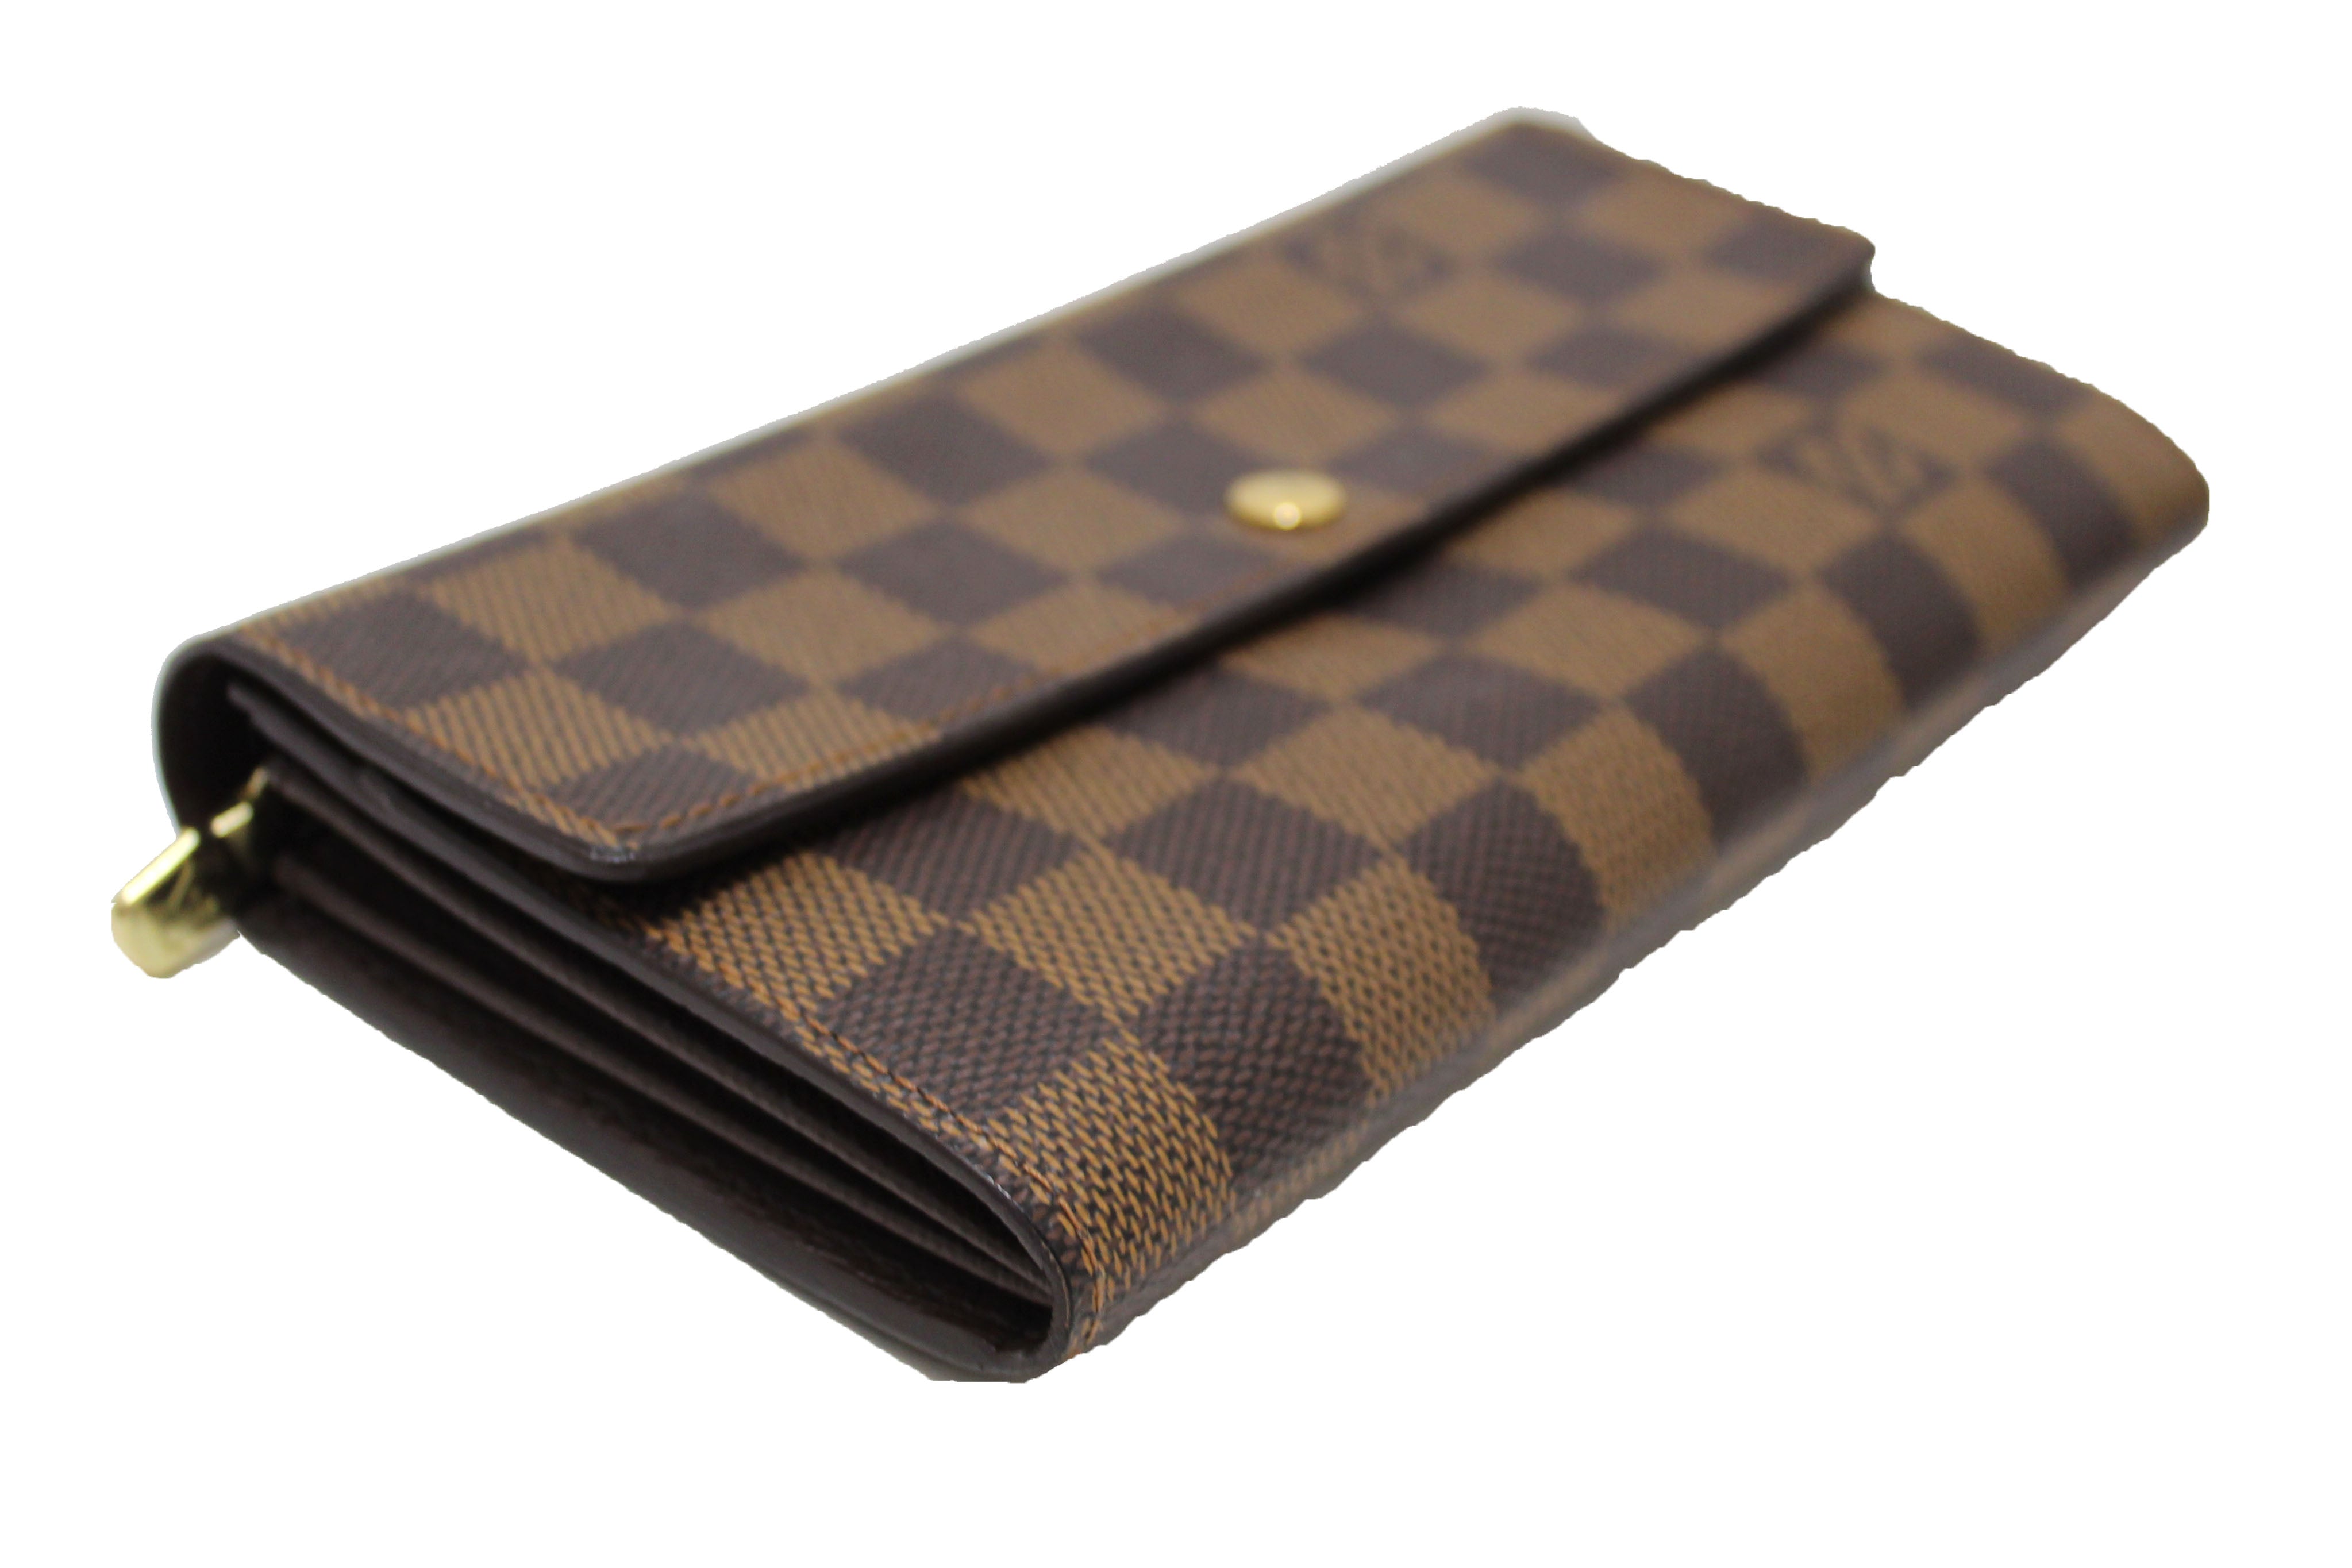 Sarah Wallet Damier Ebène Canvas - Wallets and Small Leather Goods